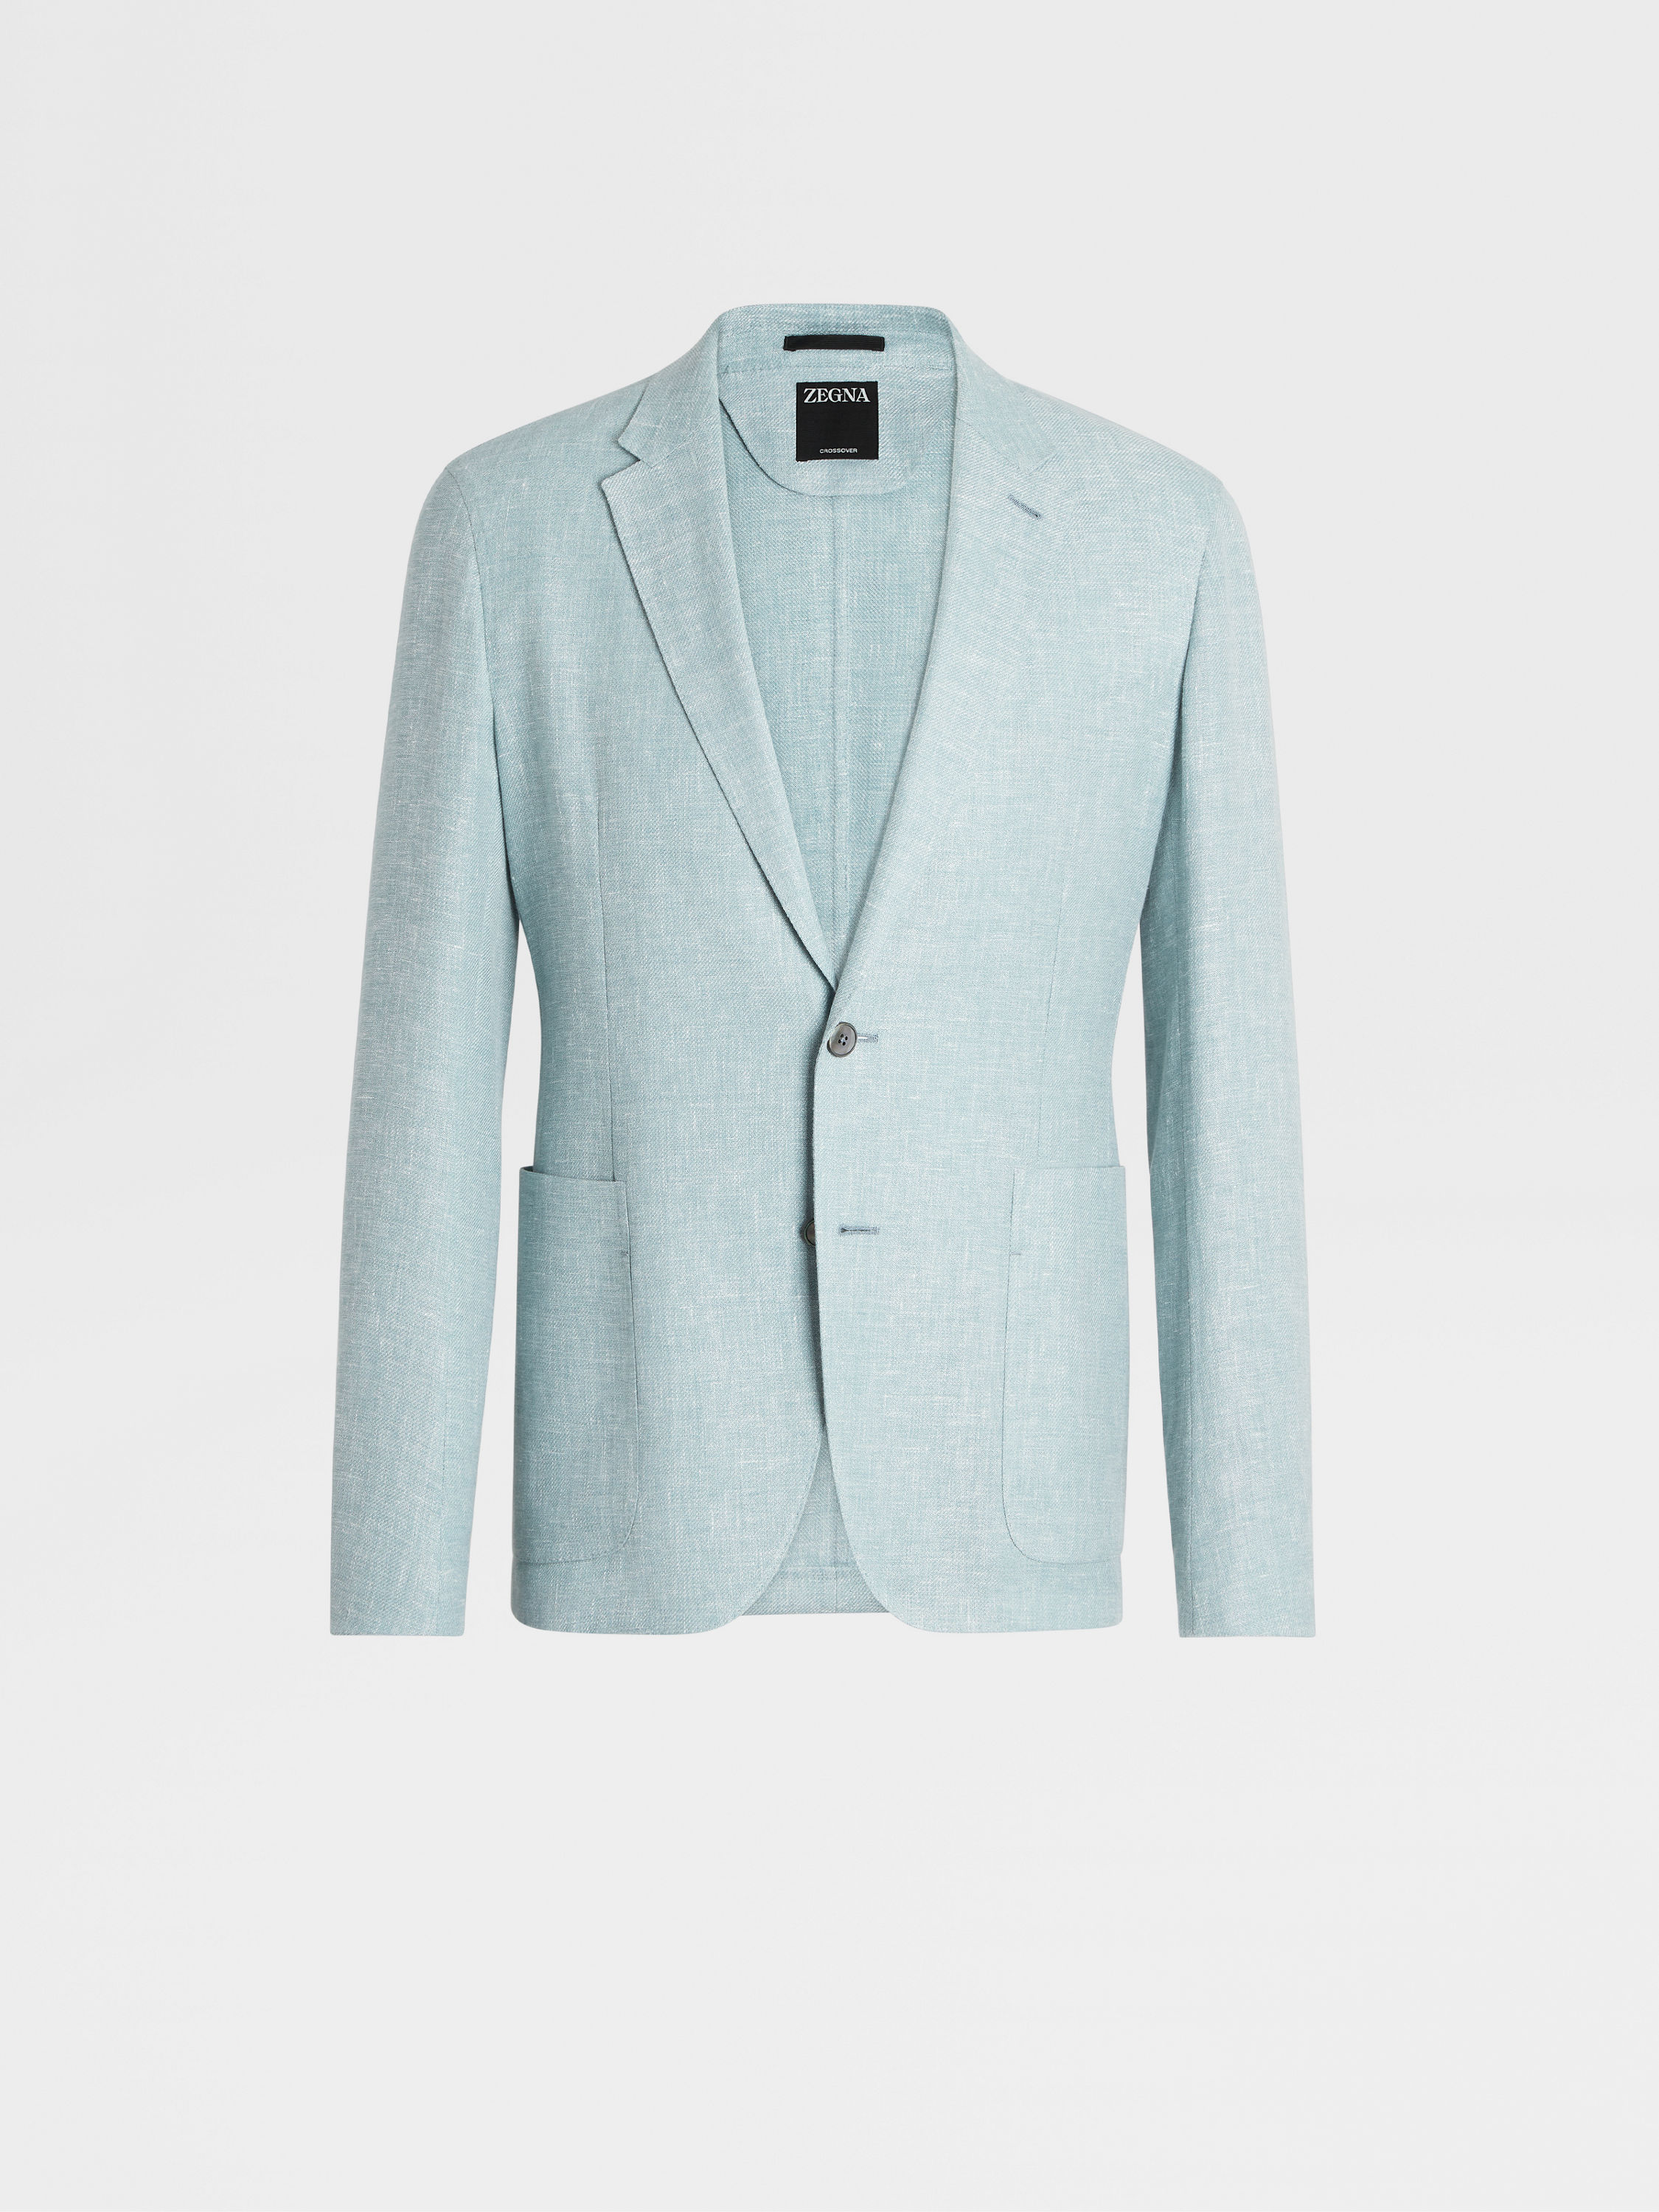 Aqua Green Microstructured Crossover Linen and Wool Blend Shirt Jacket